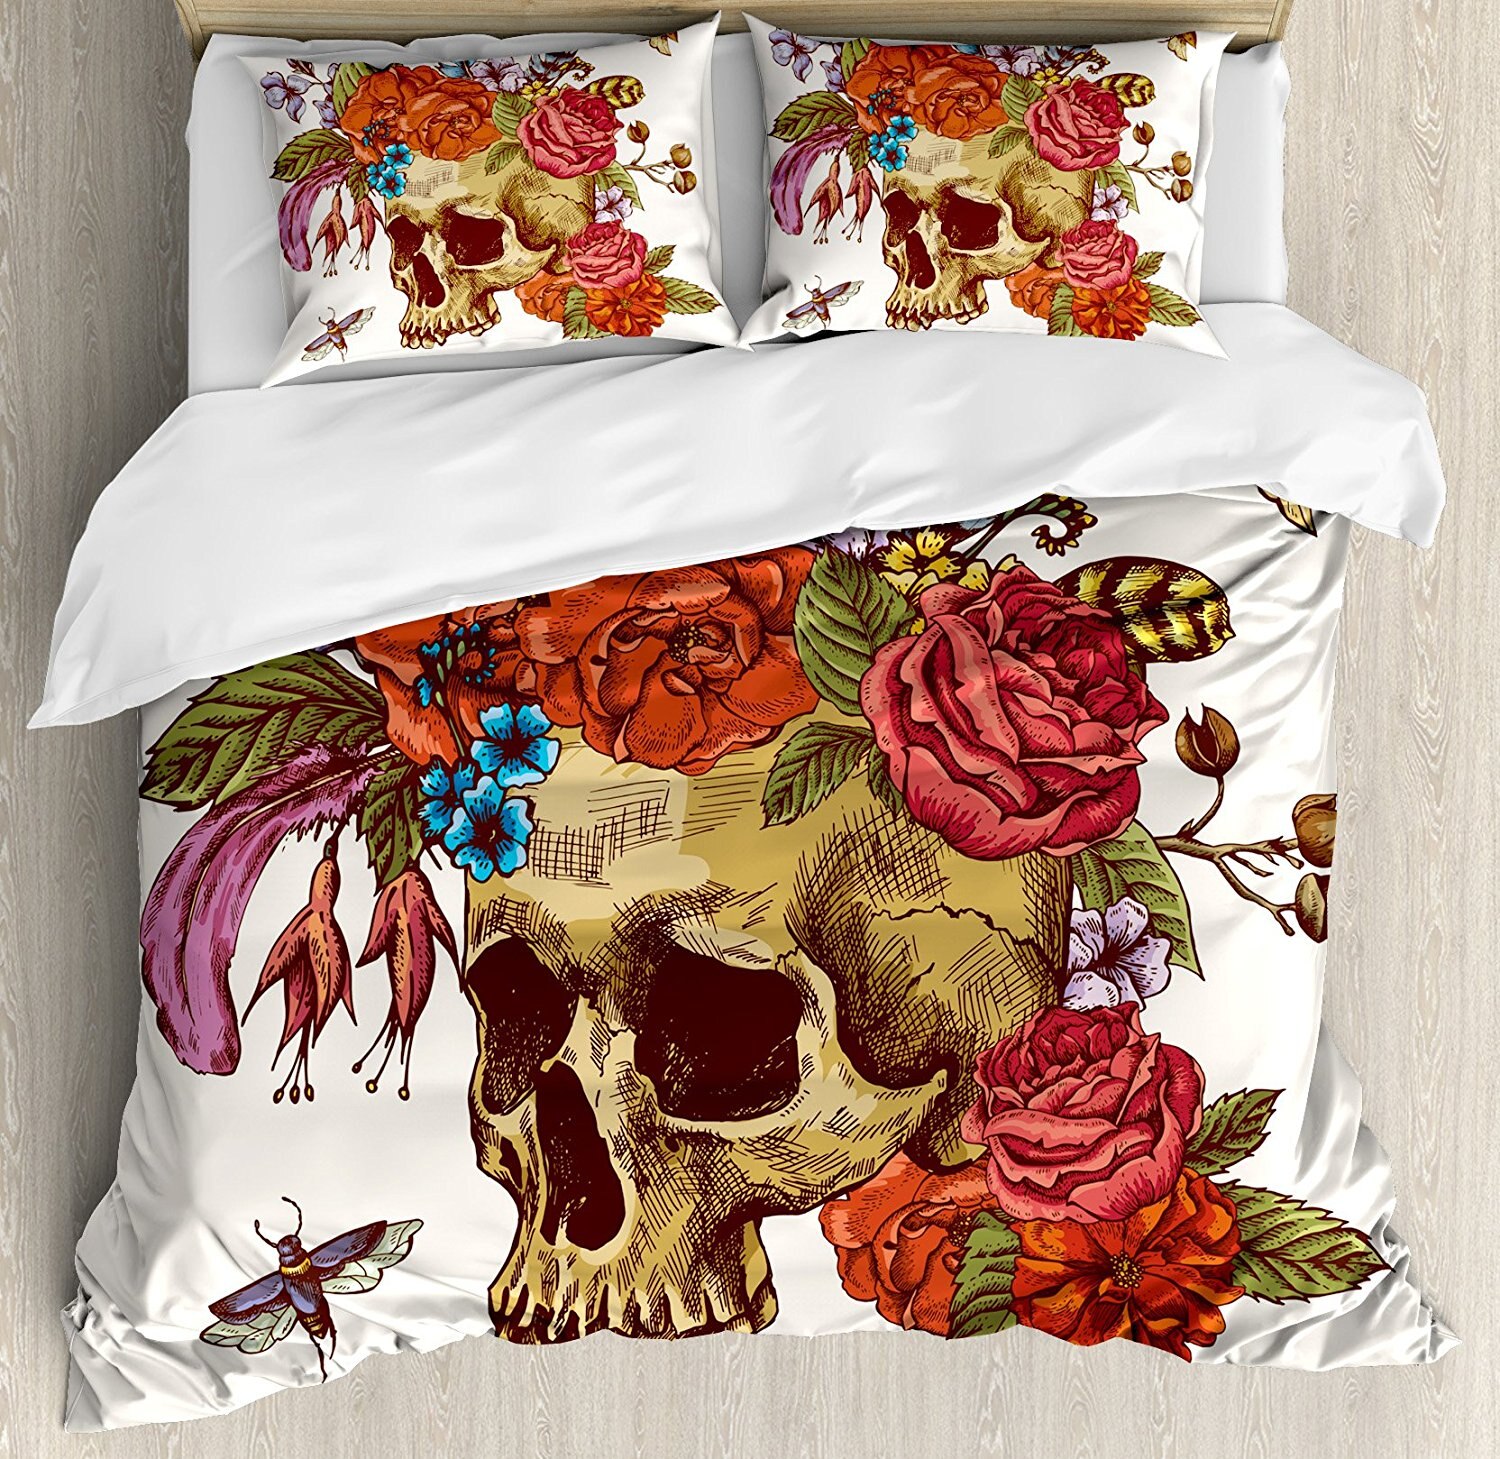  ສ Ŀ Ʈ Ƽ     ɴٹ ɰ  ܹ Ʈ ħ Ʈ/Day Of The Dead Duvet Cover Set Vintage Sugar Skull Bouquet of Flowers Feathers Blooms Bugs and